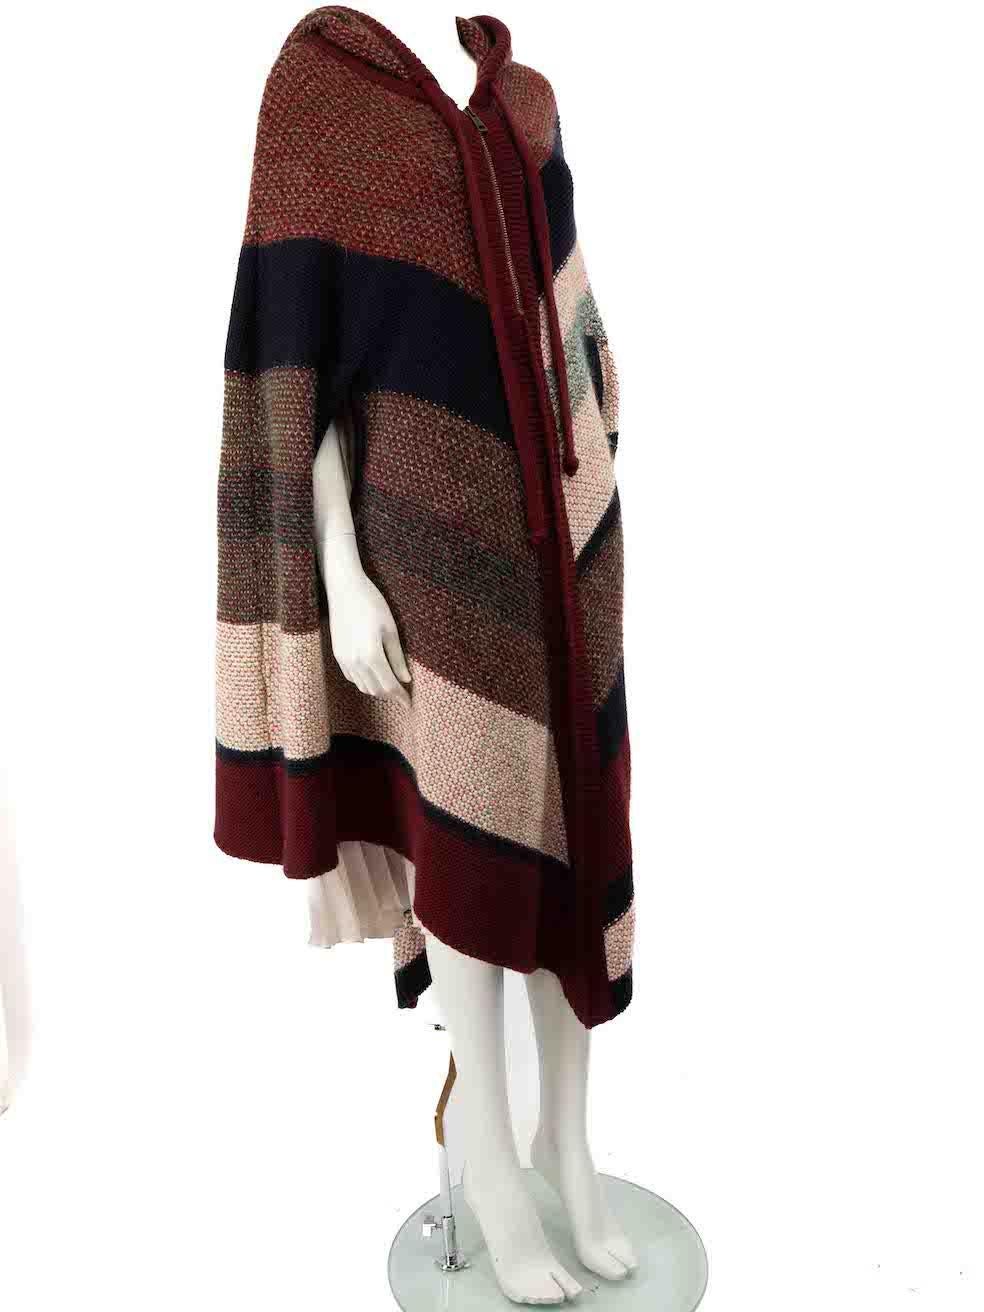 CONDITION is Very good. Minimal wear to cape is evident. Minimal pilling to overall material on this used Chloé designer resale item.
 
 
 
 Details
 
 
 Multicolour-burgundy, navy, cream
 
 Wool
 
 Poncho
 
 Knitted
 
 Hooded
 
 Front half zip